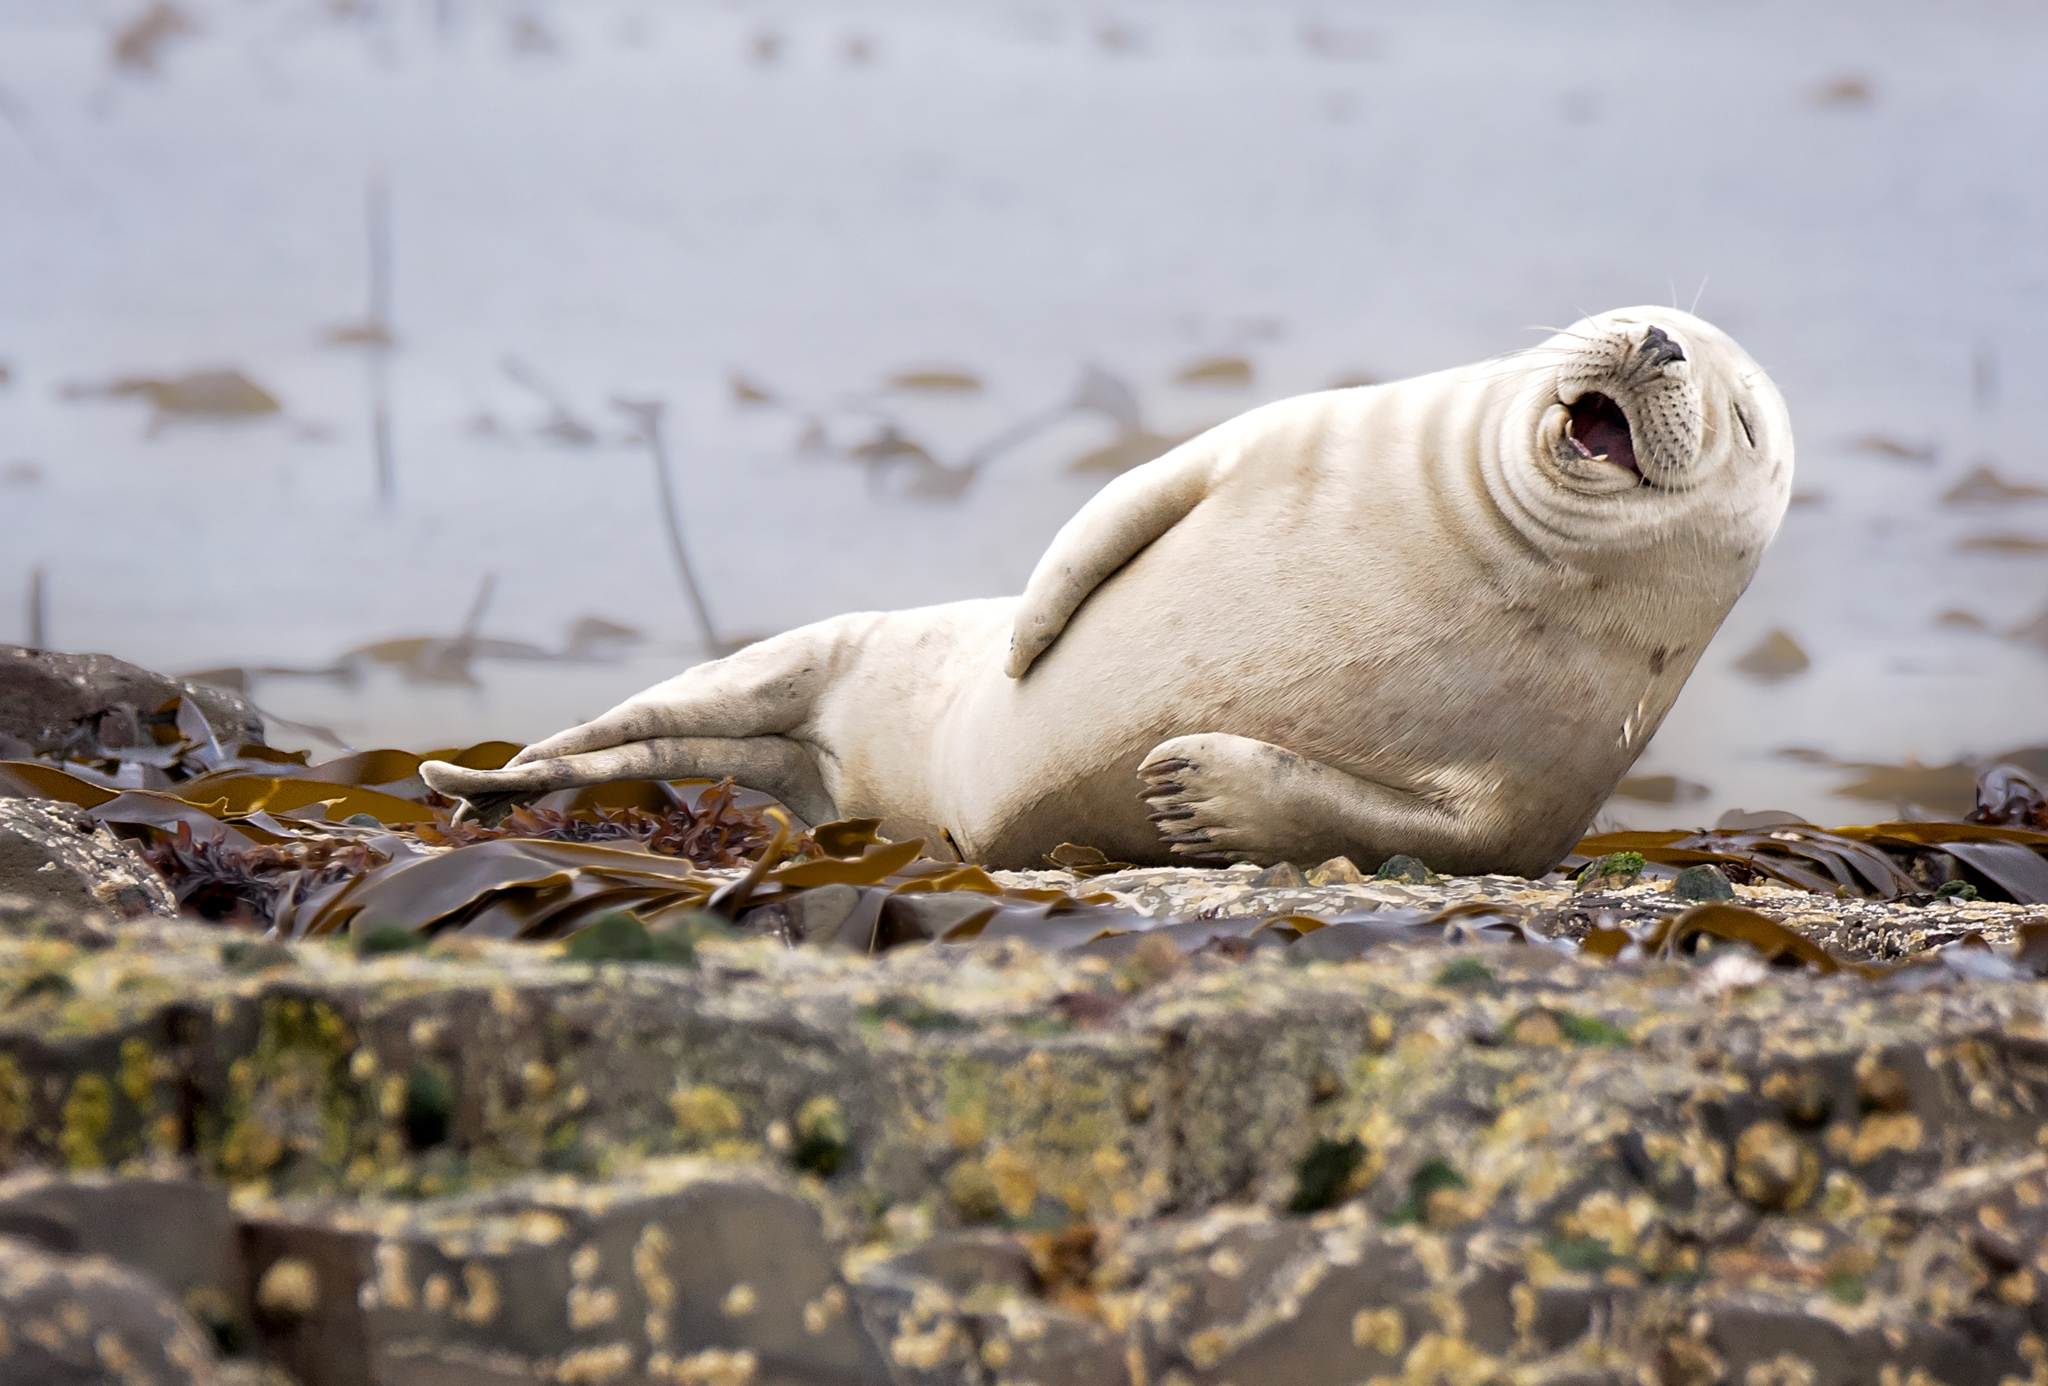 These Are The Winners Of The 2015 Comedy Wildlife Awards